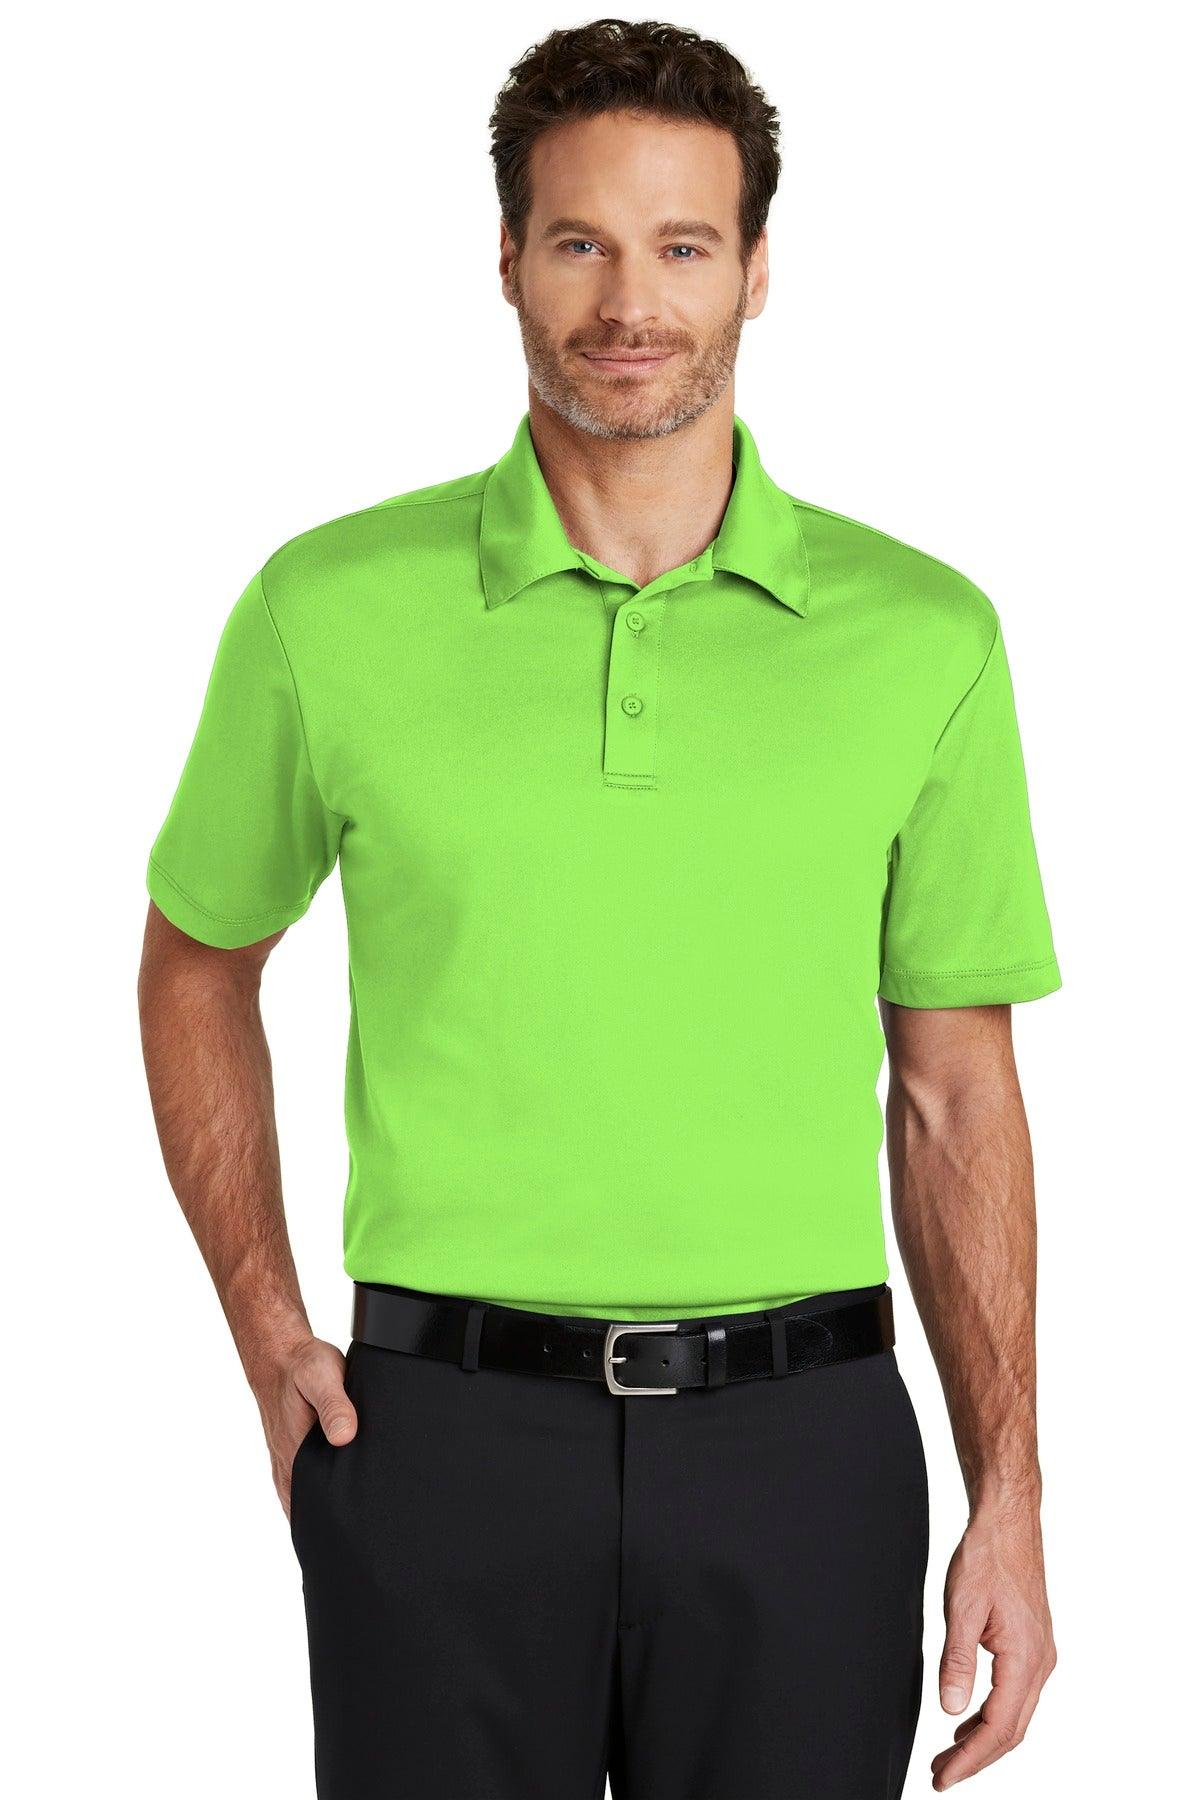 Port Authority Silk Touch Performance Polo. K540 - Dresses Max